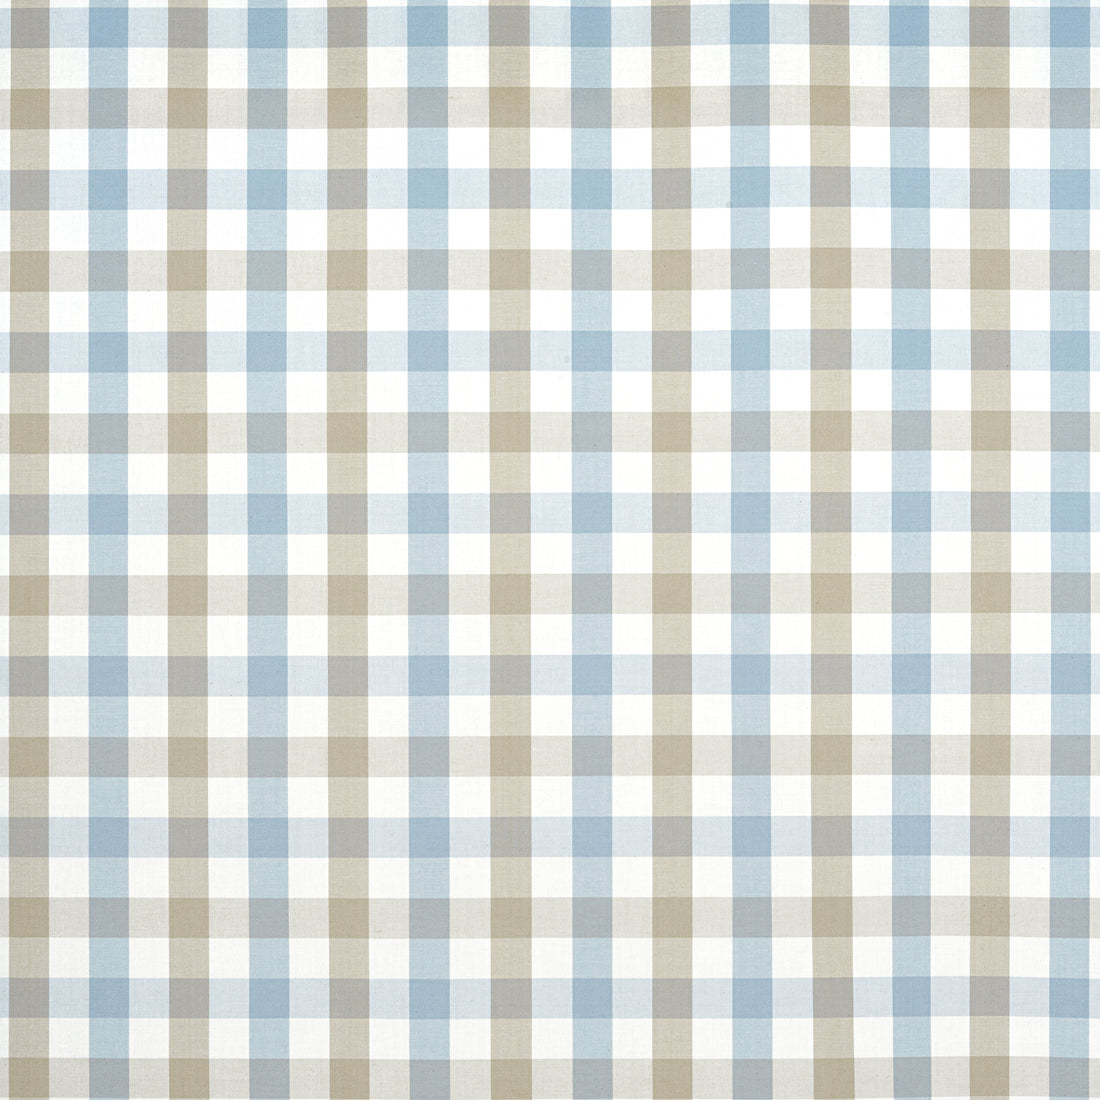 Saybrook Check fabric in spa blue and beige color - pattern number AW15151 - by Anna French in the Antilles collection